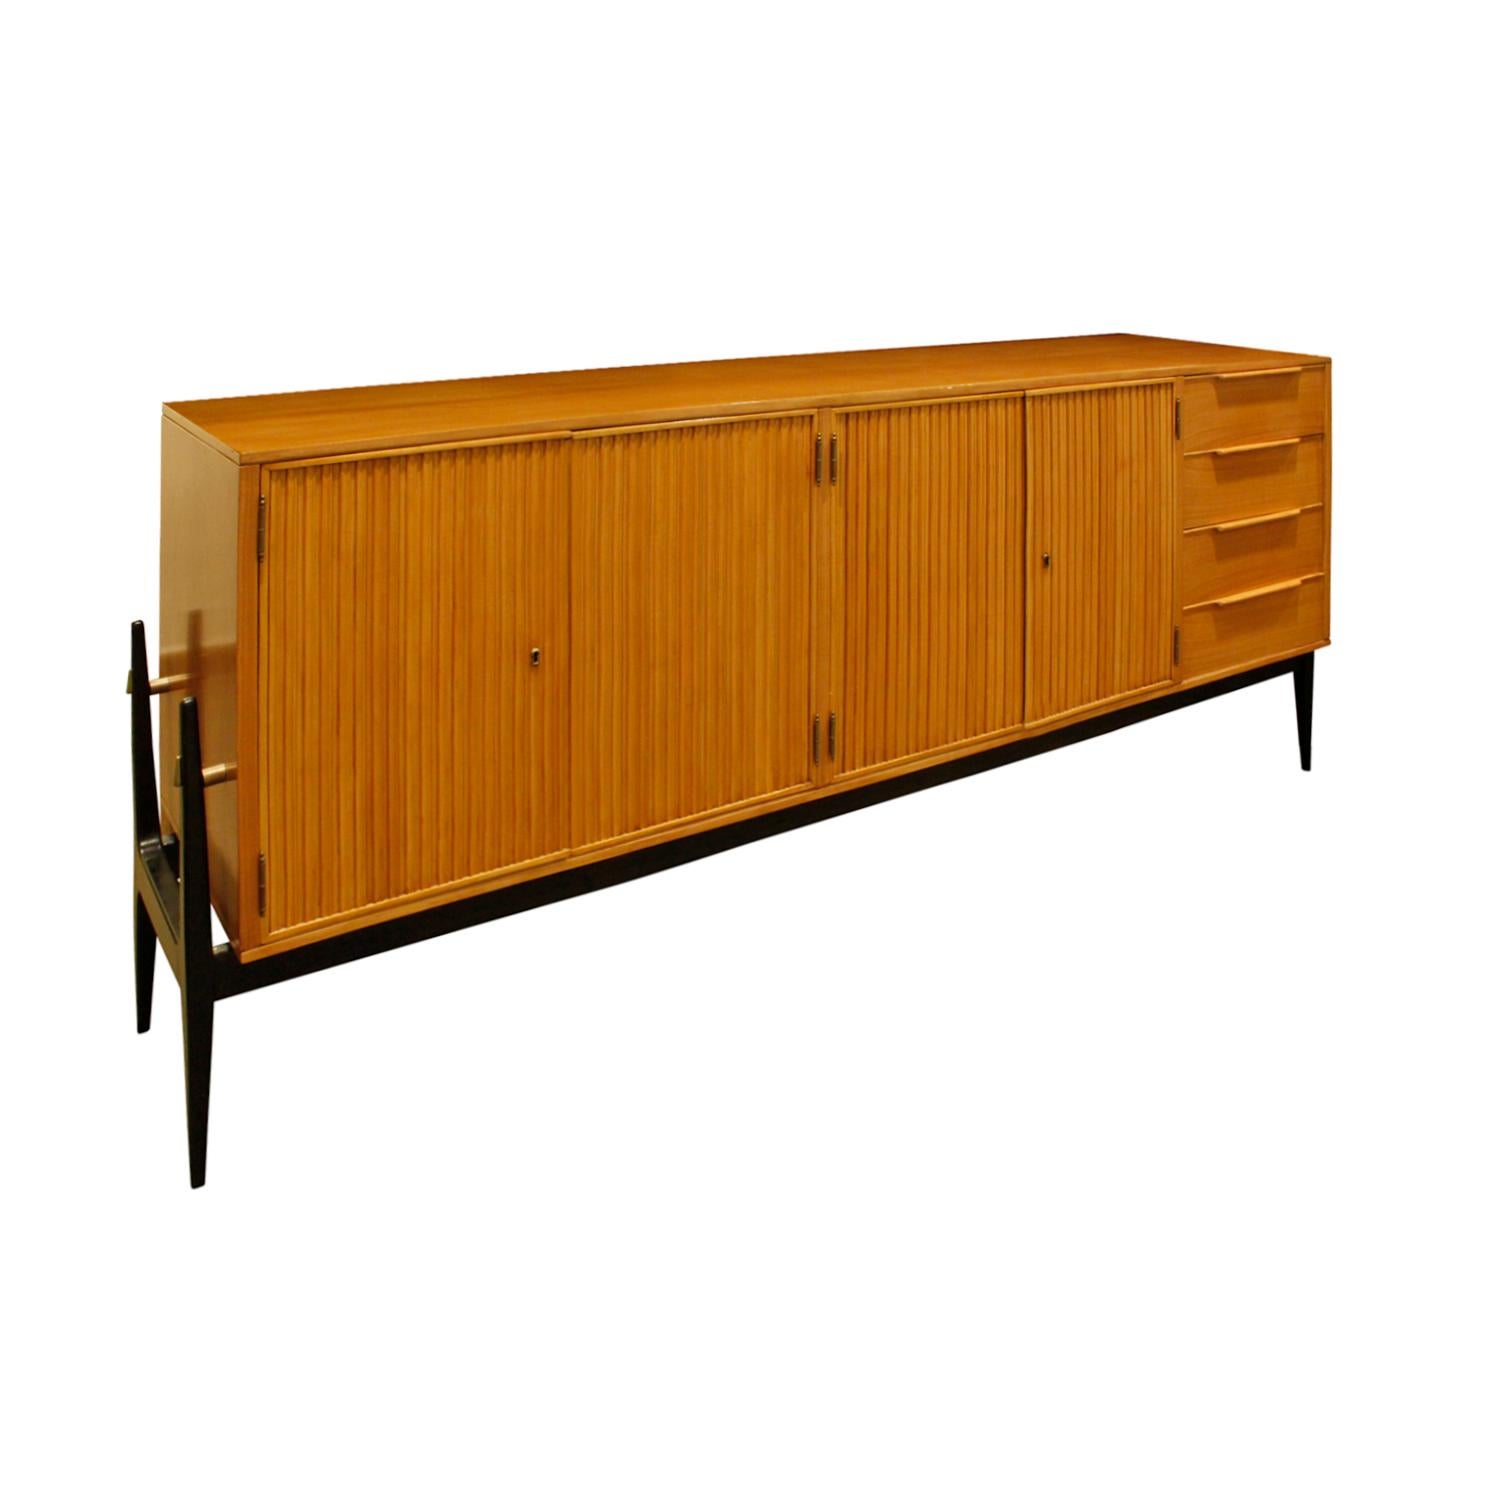 Credenza with 4 fluted doors and 4 drawers on the right in fruitwood on an ebonized base in the style of Alfred Hendrickx, Belgium, 1950s. This piece is beautifully crafted and very elegant.